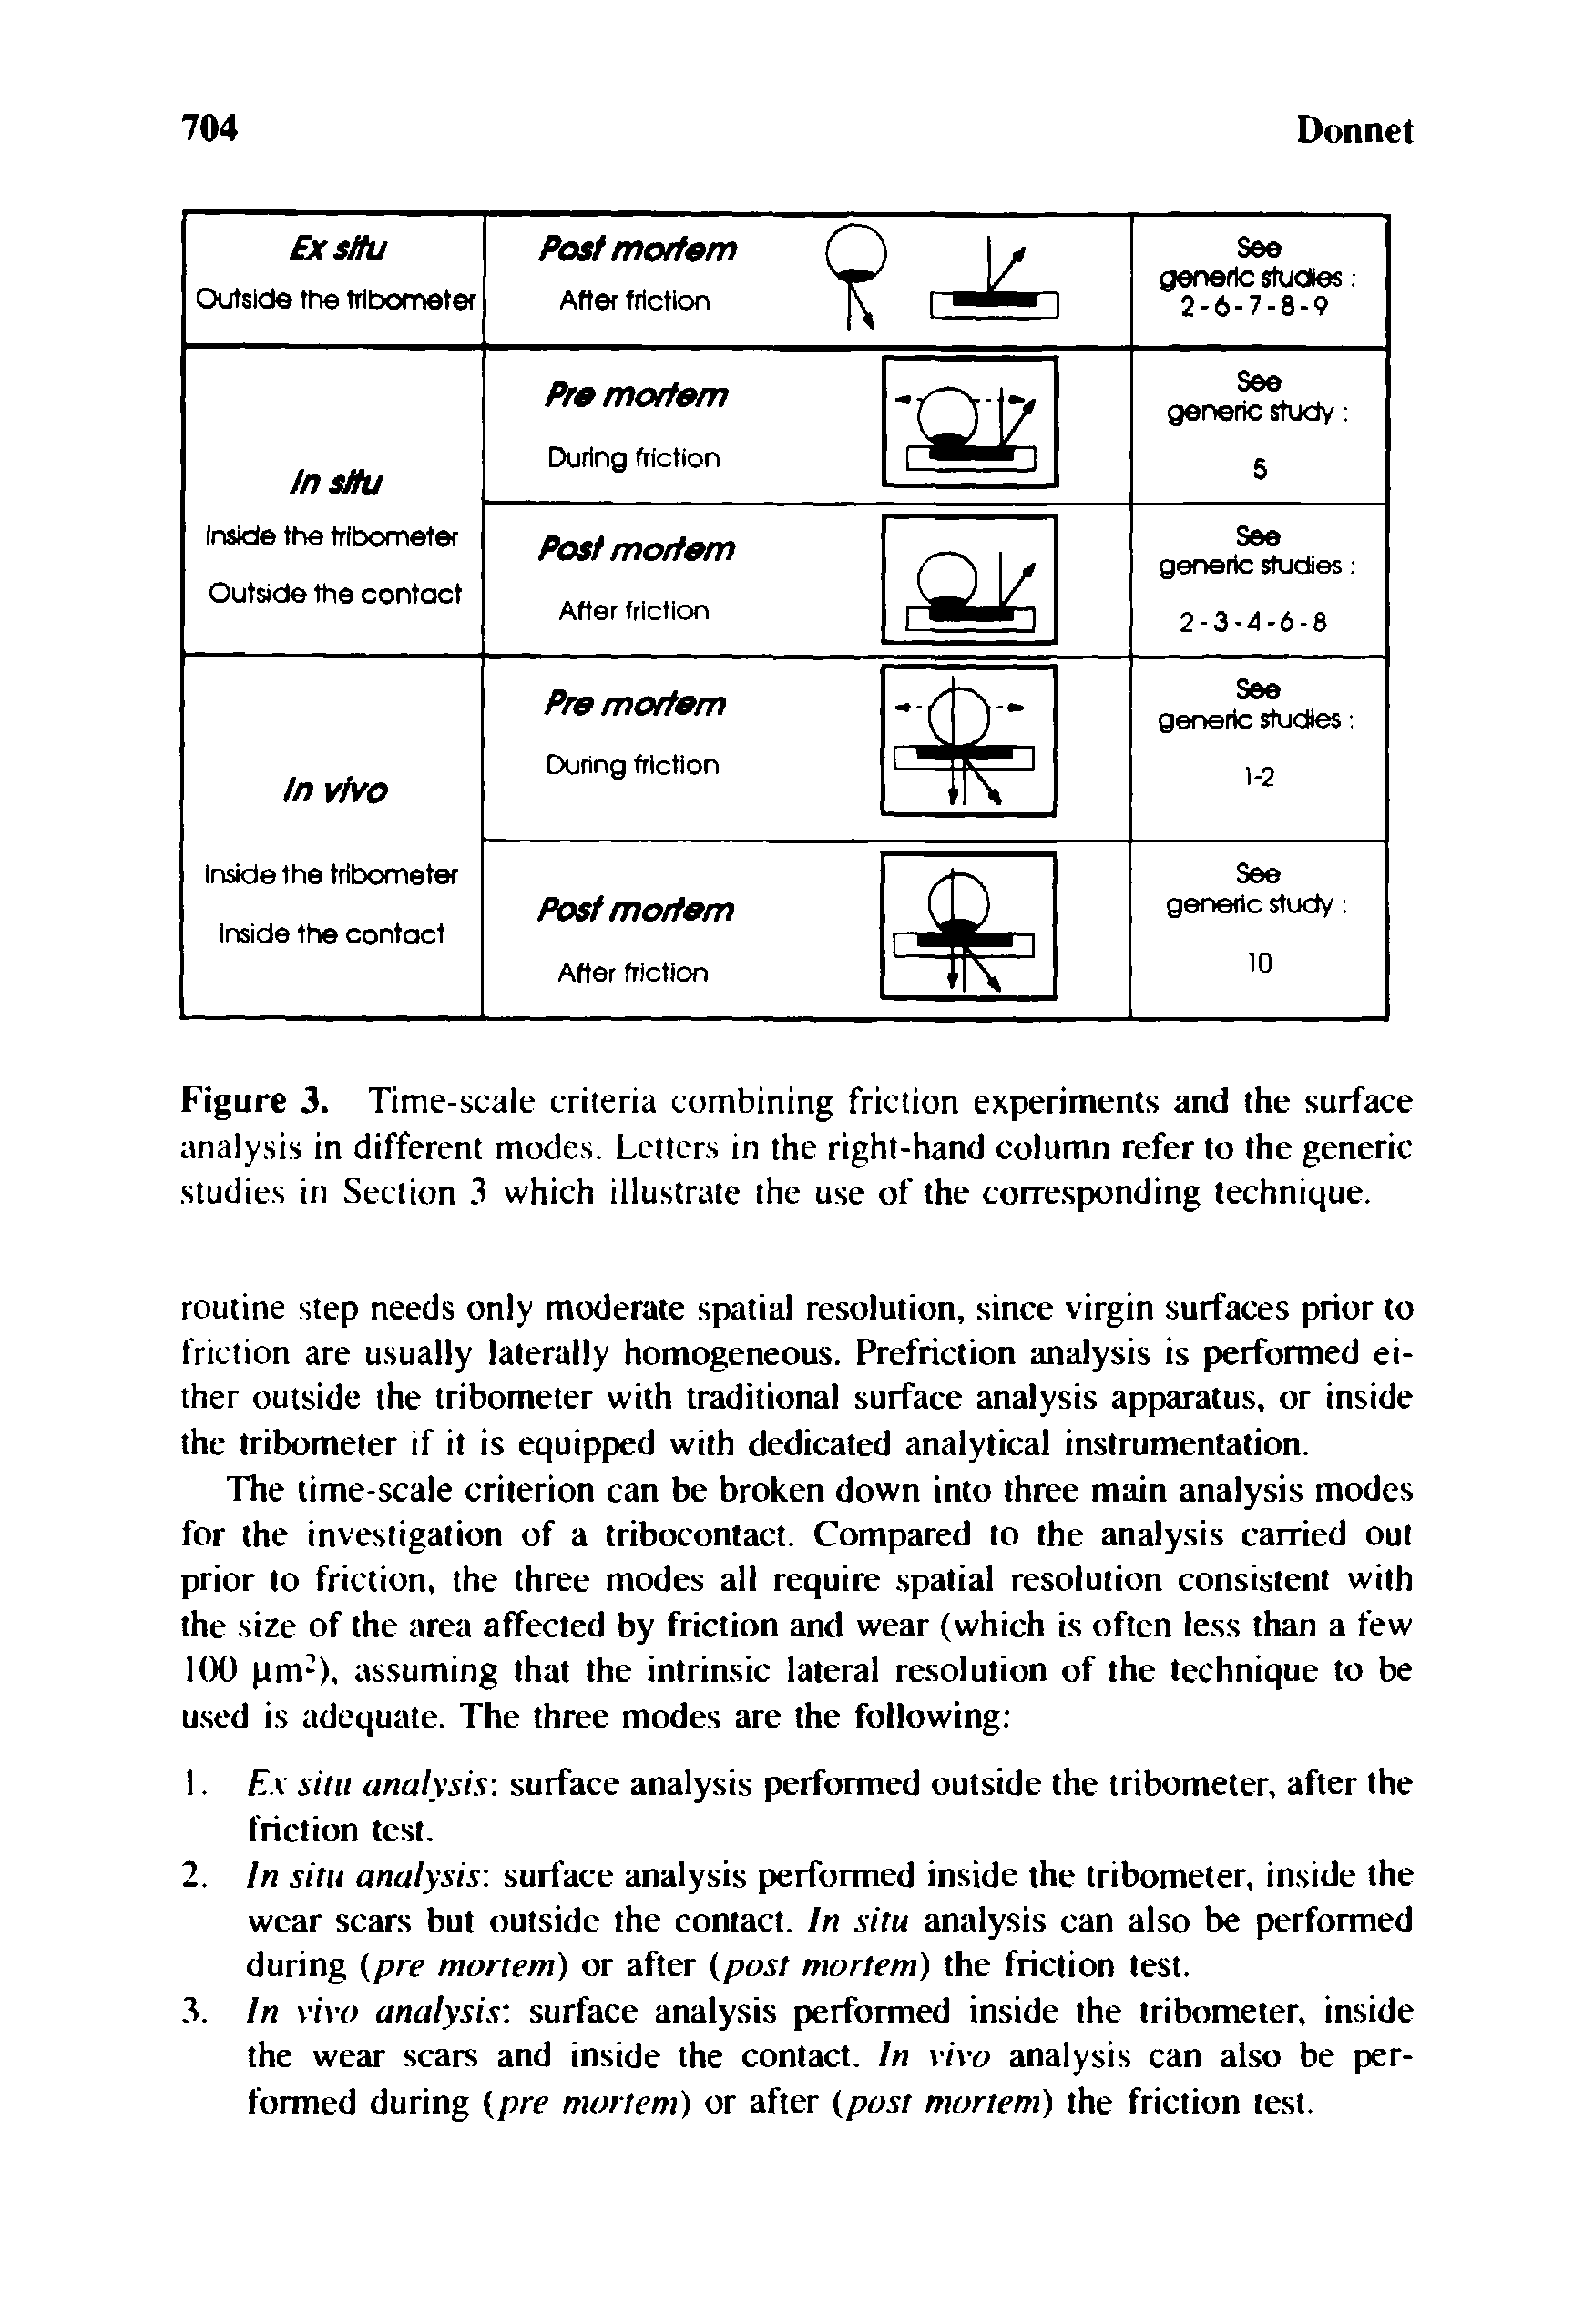 Figure 3. Time-scale criteria combining friction experiments and the surface analysis in different modes. Letters in the right-hand column refer to the generic studies in Section 3 which illustrate the use of the conre.sponding technique.